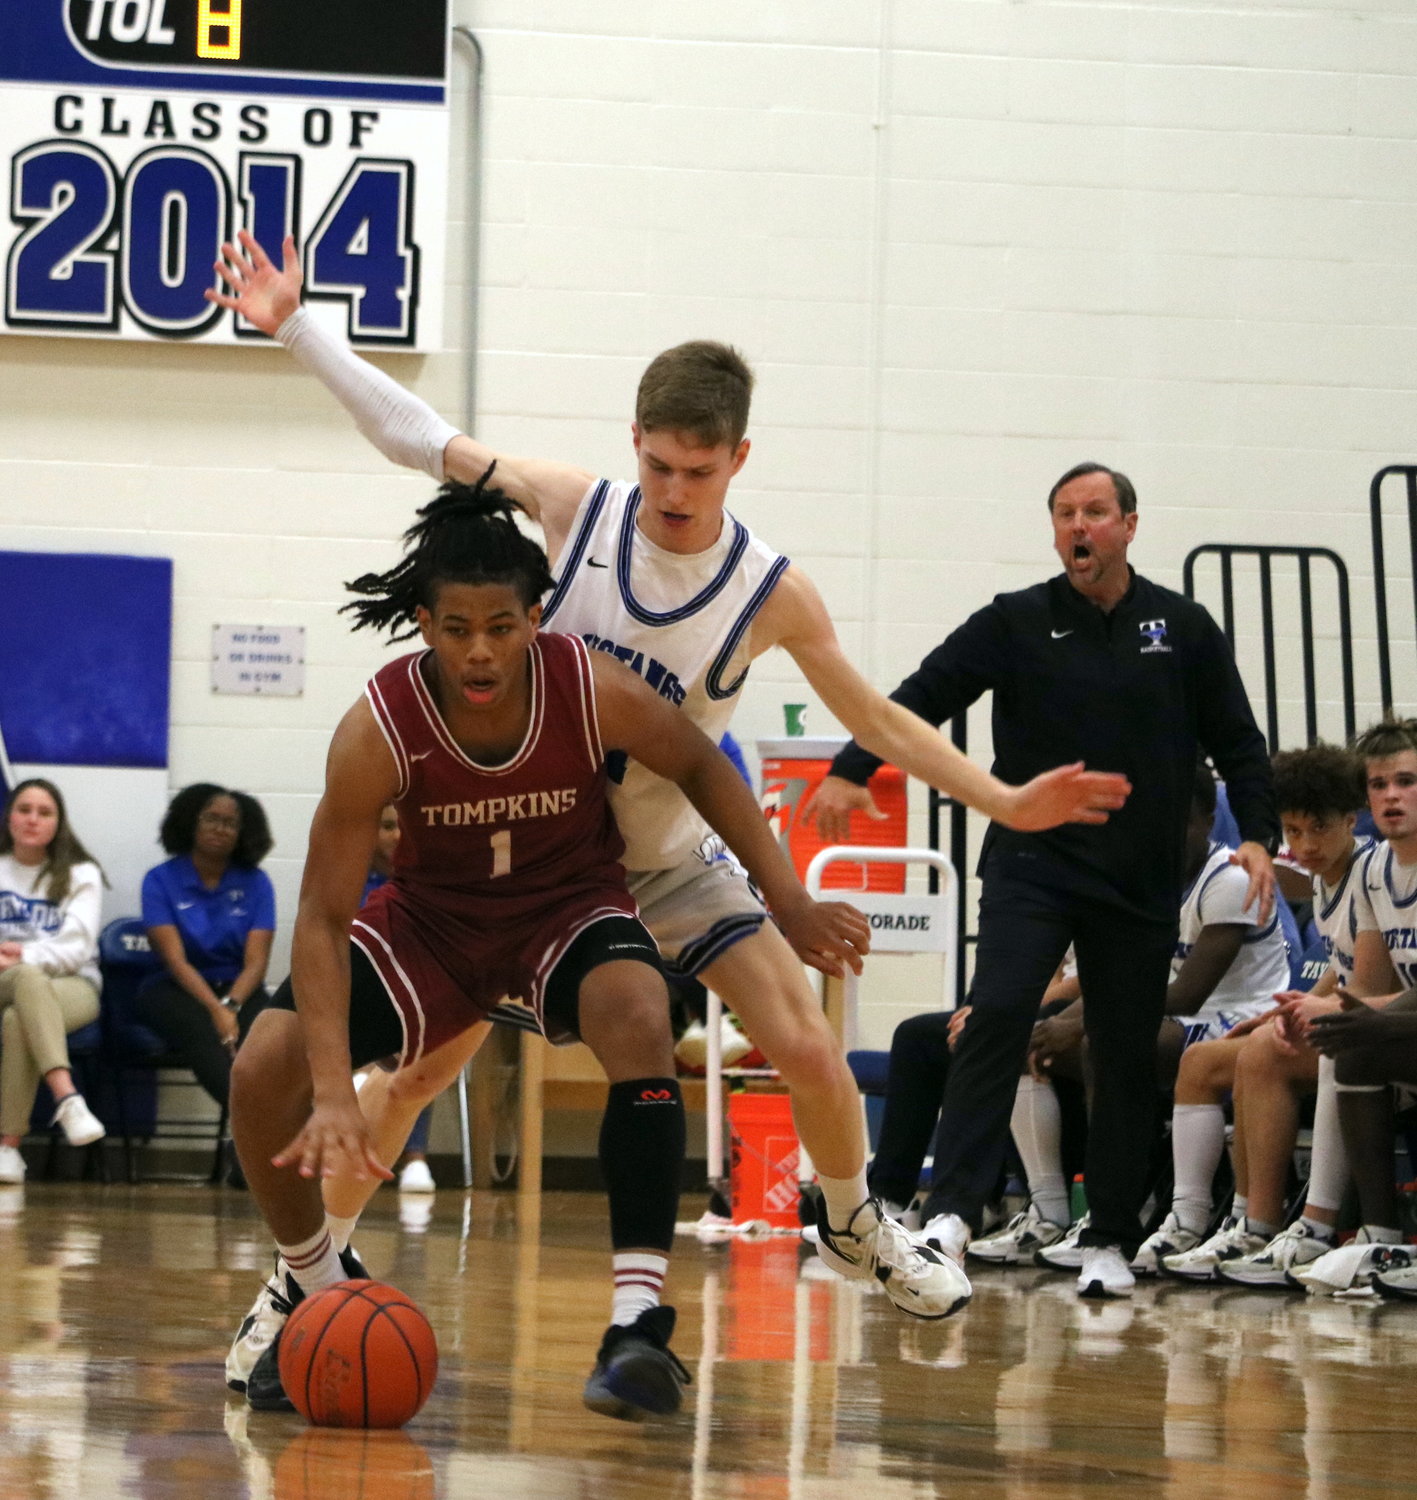 Scottie Guillory muscles off a defender while dribbling during Saturday's game between Tompkins and Taylor at the Taylor gym.